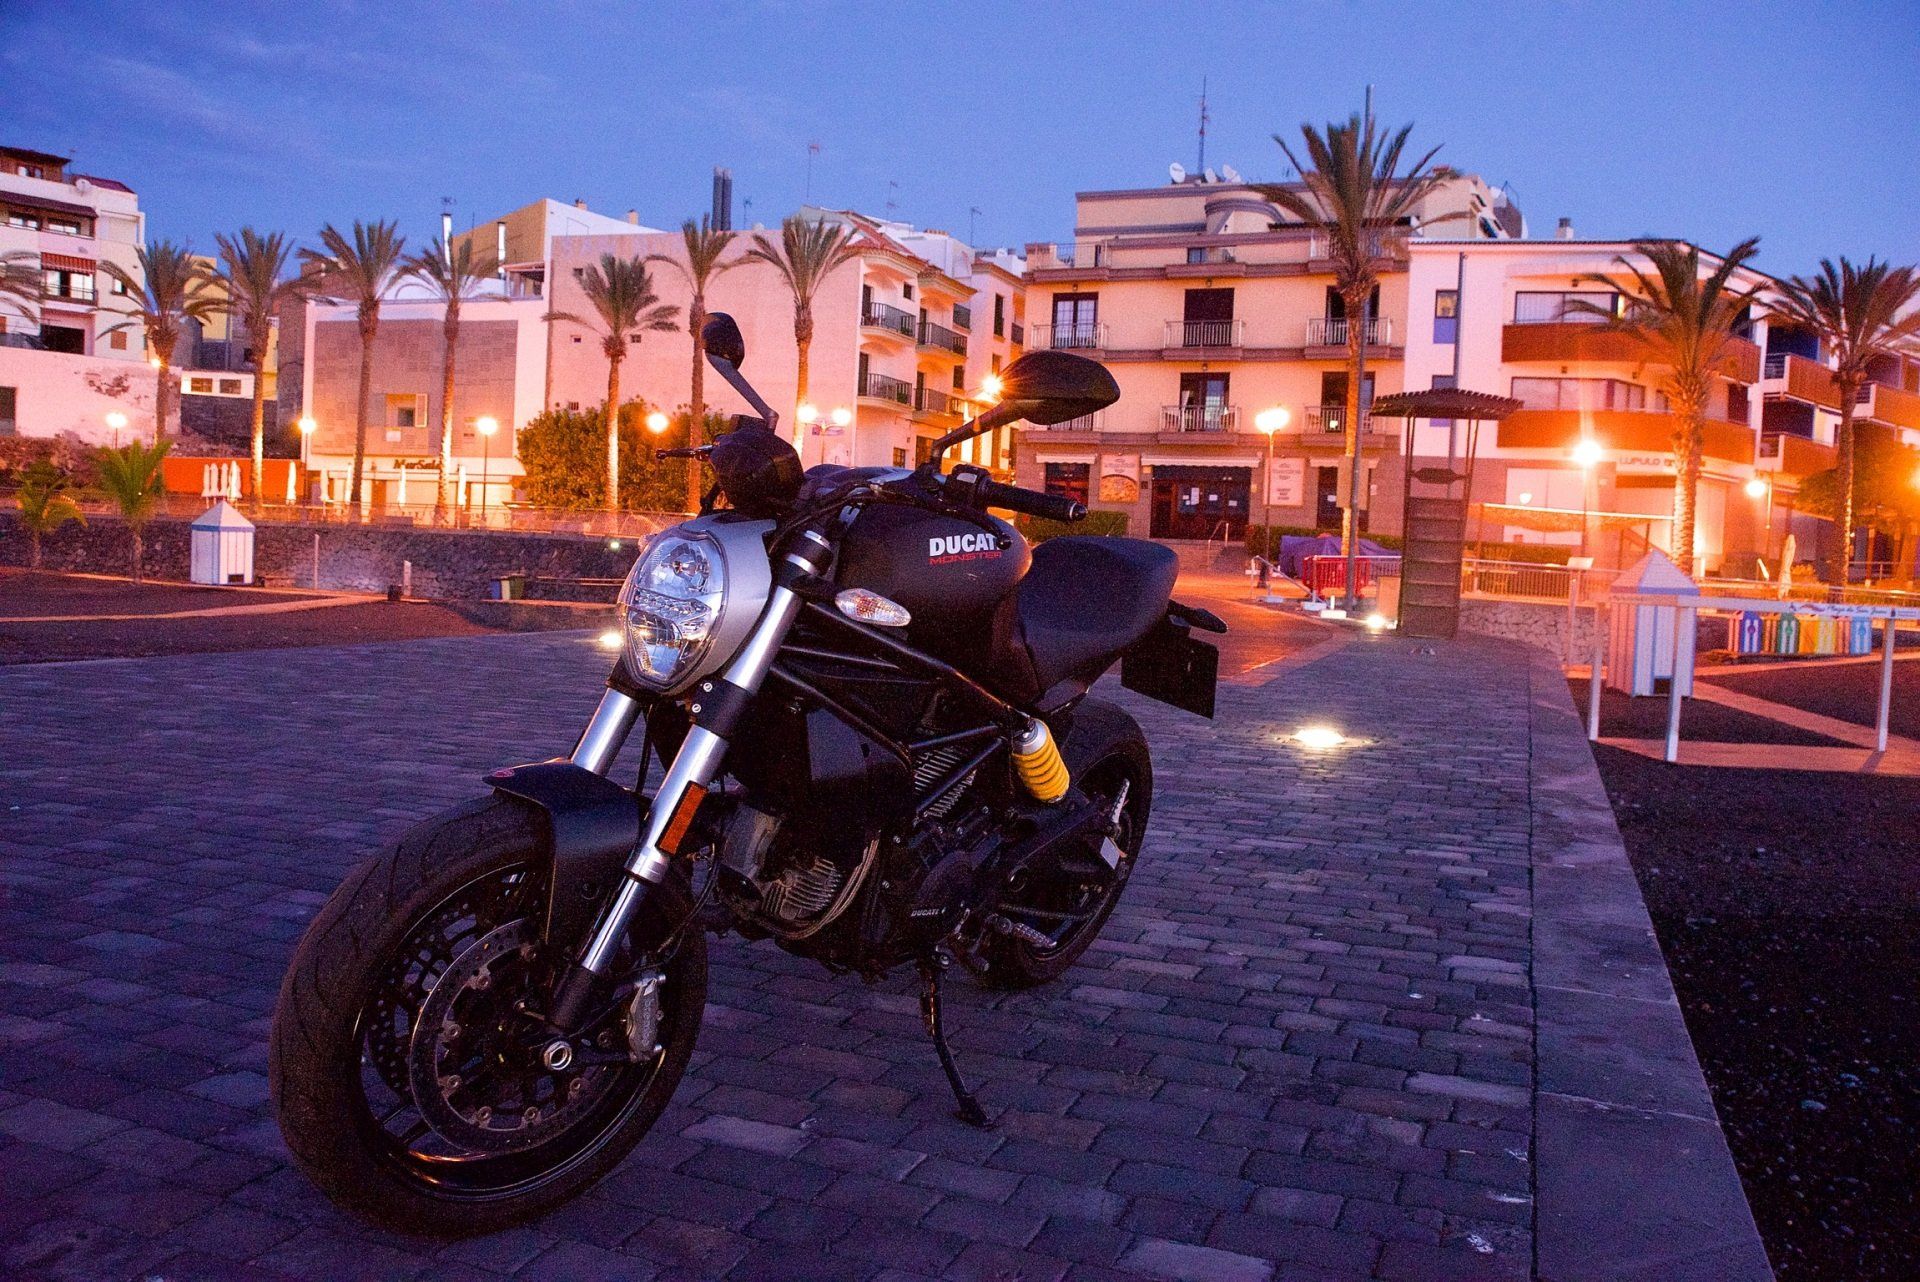 A motorcycle is parked in front of a building at night